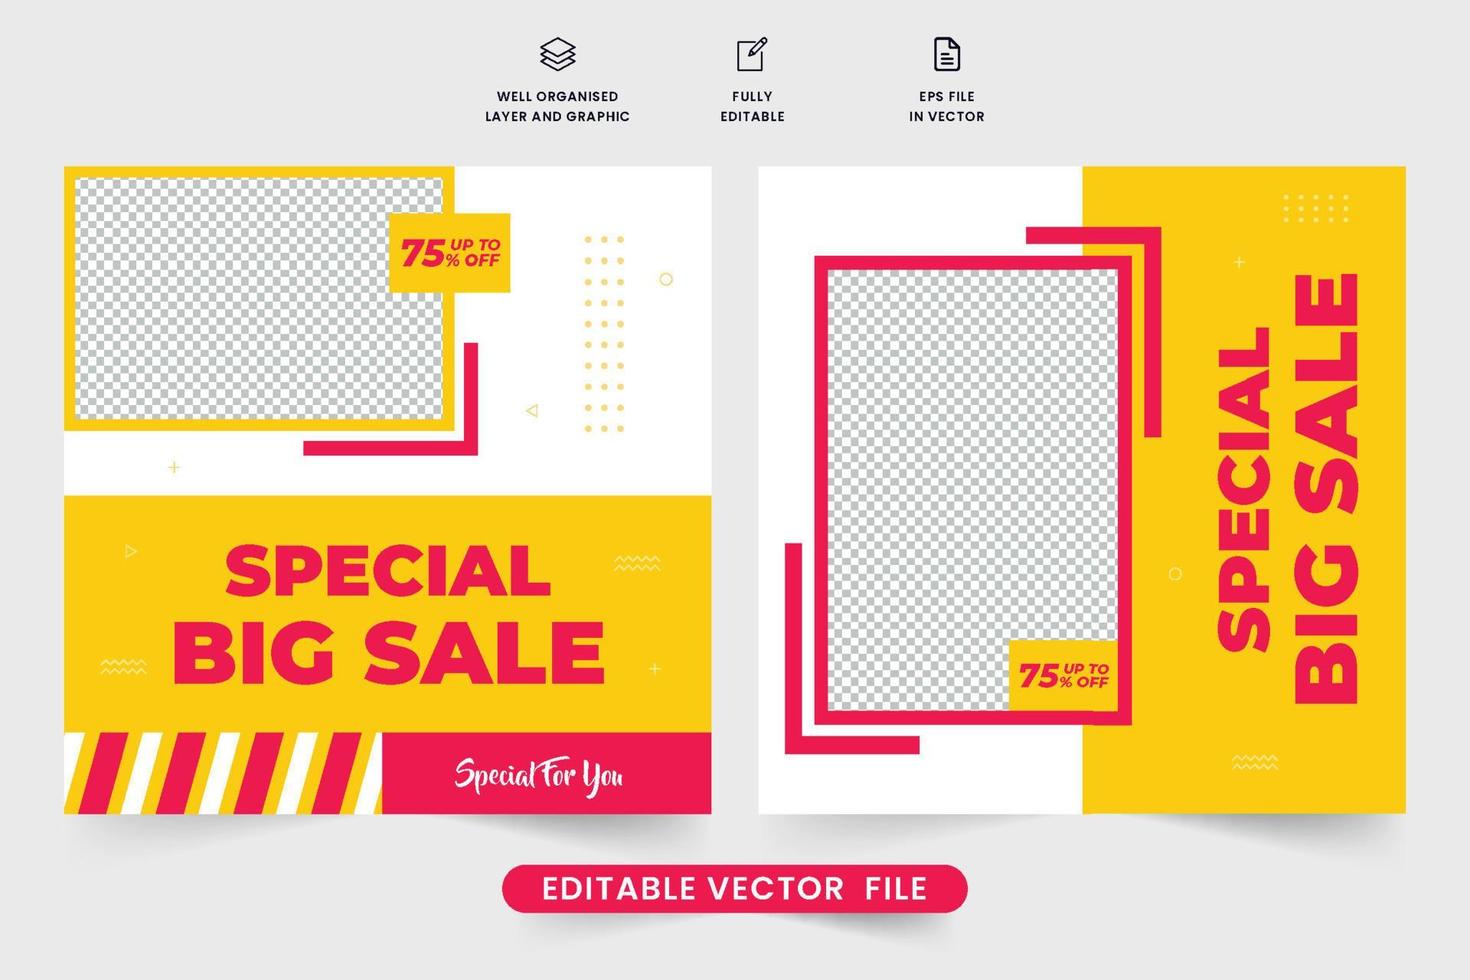 Special clearance sale social media post vector with discount offer sections. Fashion sale and discount template design with yellow and red colors. Modern business advertisement web banner vector.